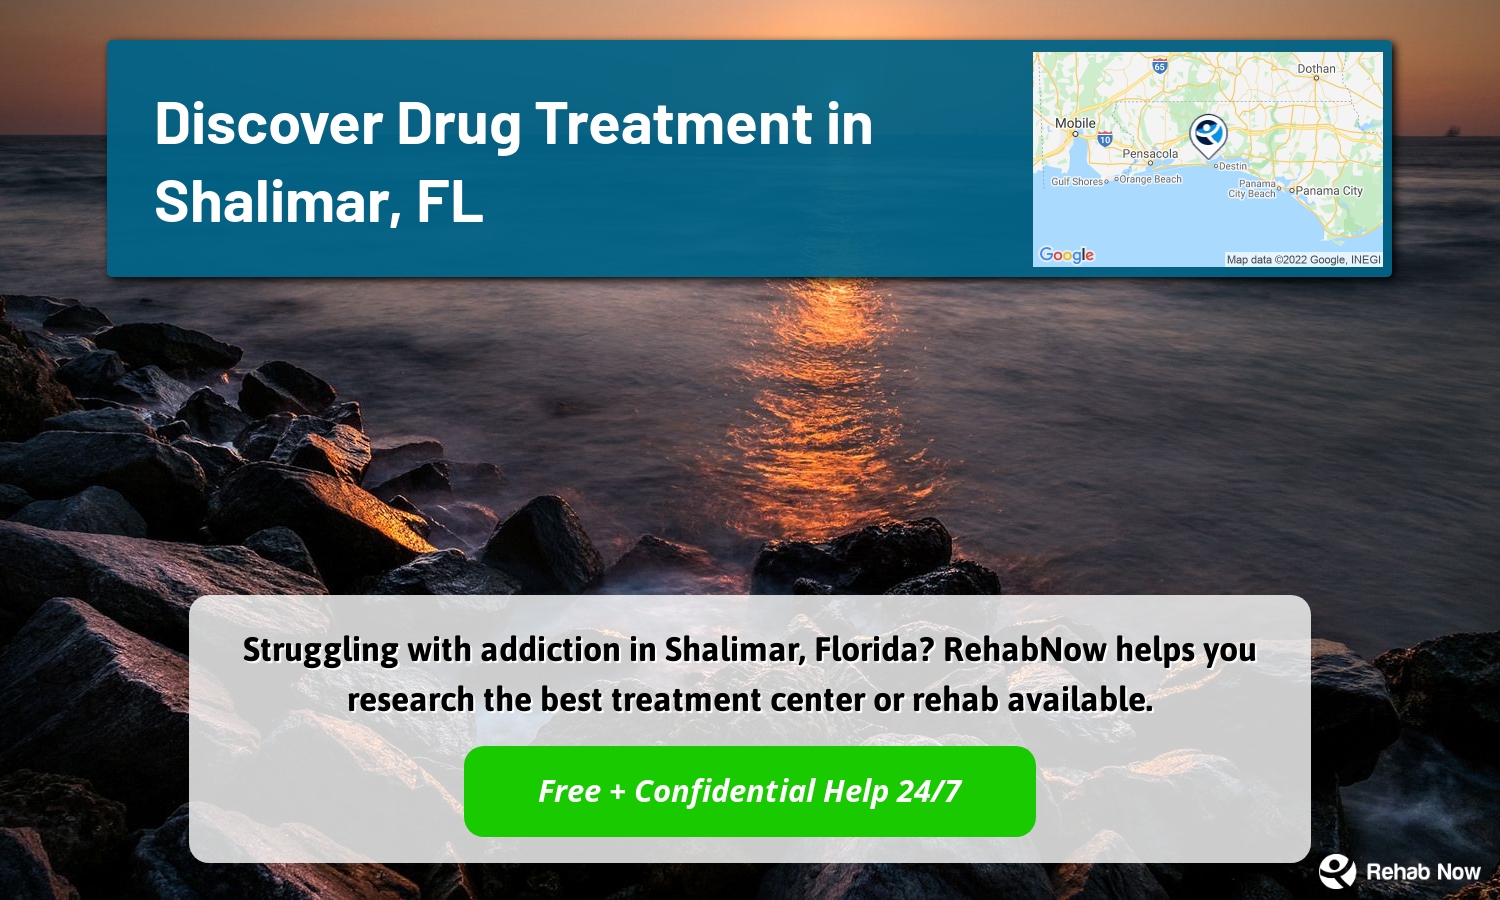 Struggling with addiction in Shalimar, Florida? RehabNow helps you research the best treatment center or rehab available.